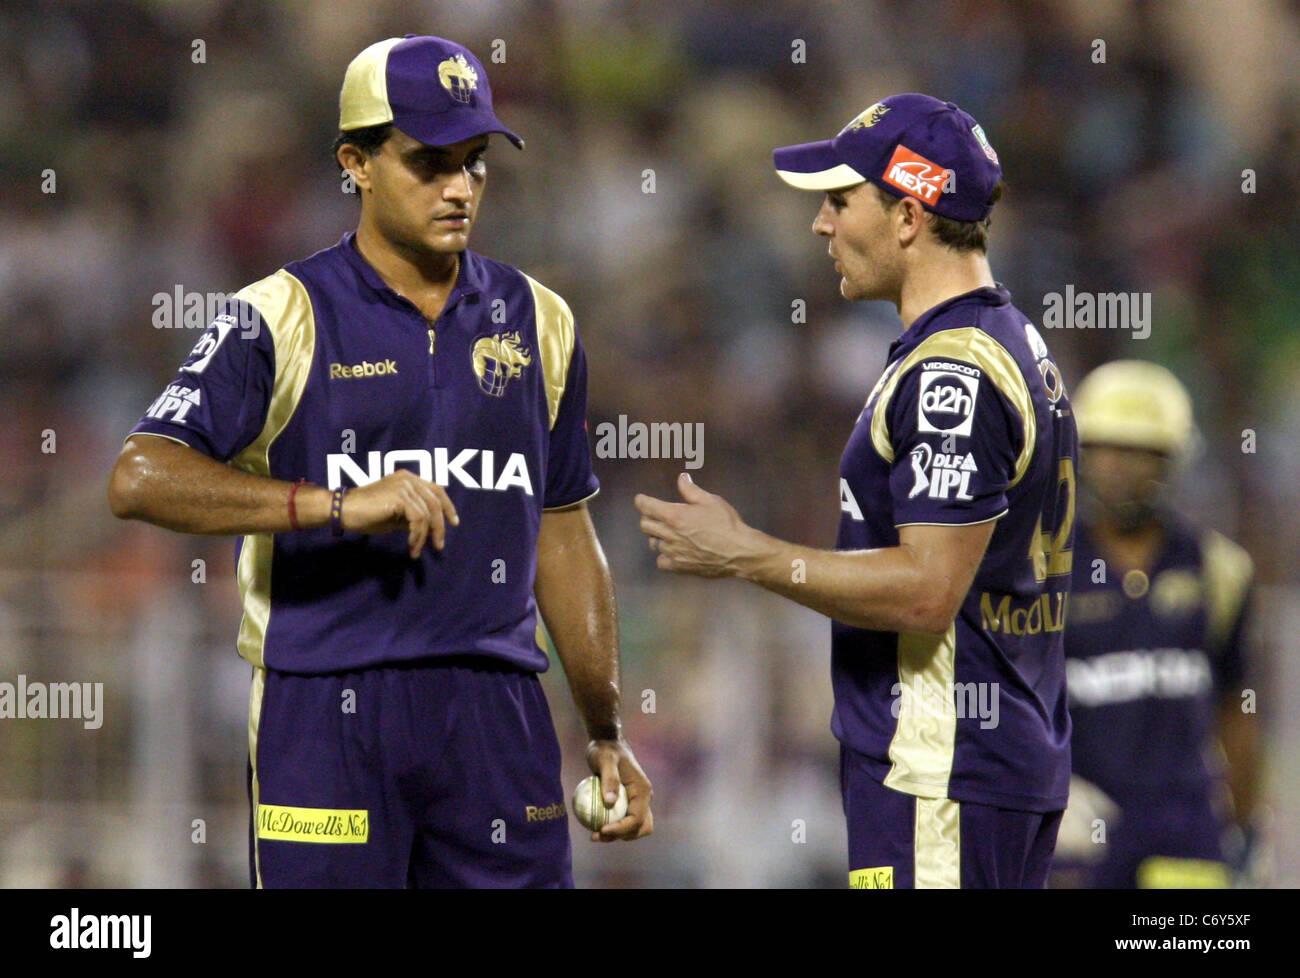 Kolkata Knight Riders Players Sourav Ganguly And Brendon McCullum Against the Delhi Daredevils During The Indian Premier League Stock Photo